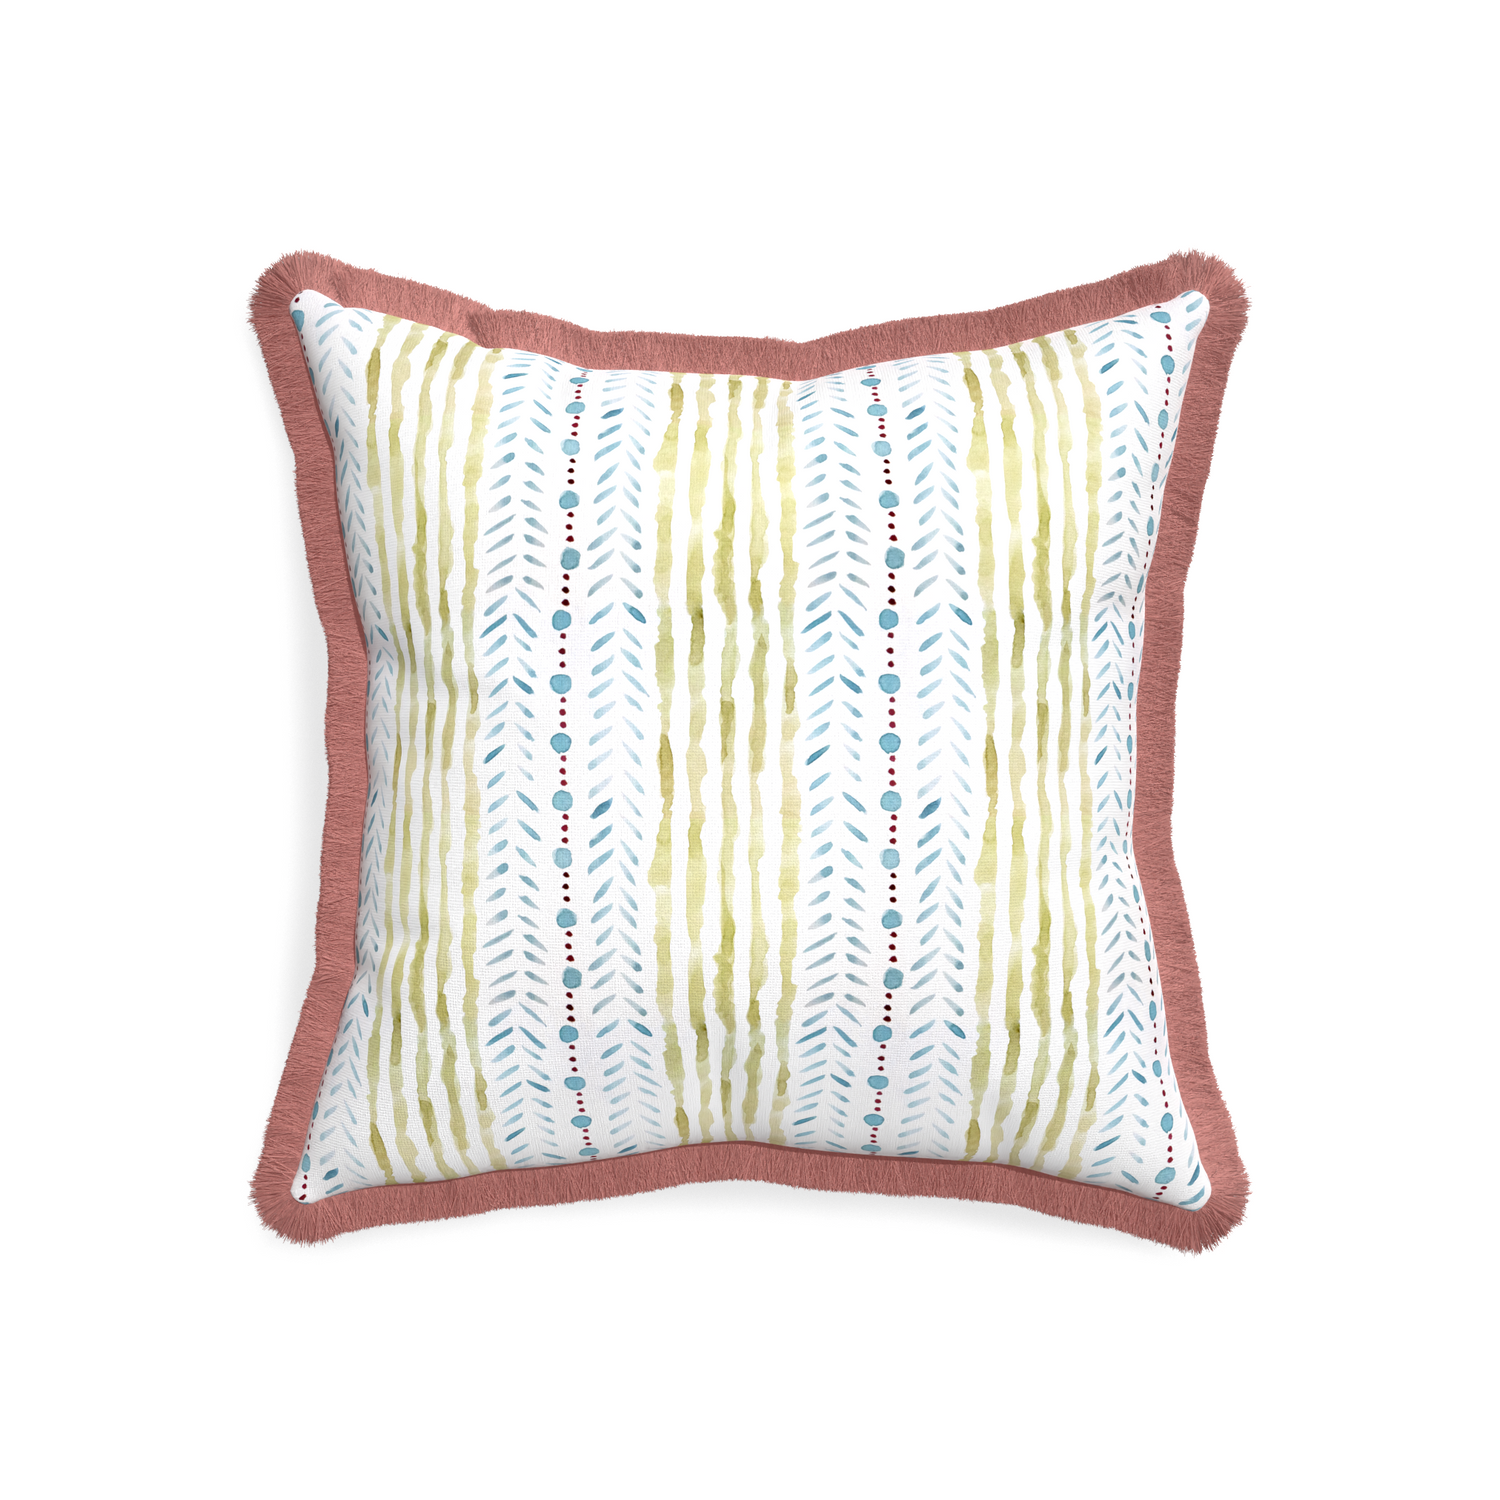 20-square julia custom blue & green stripedpillow with d fringe on white background